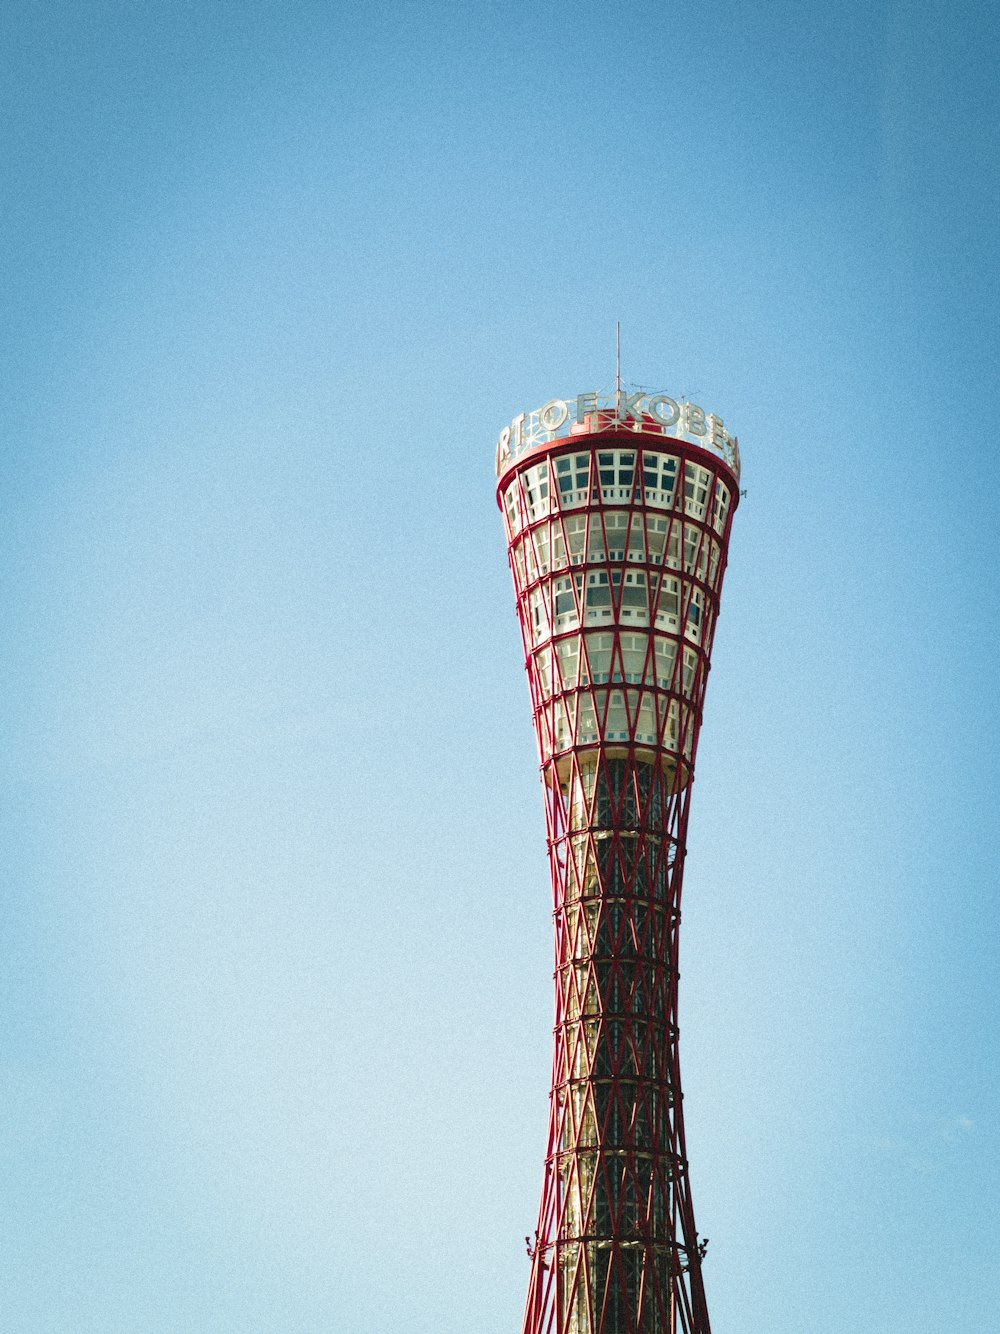 a very tall tower with a sky background